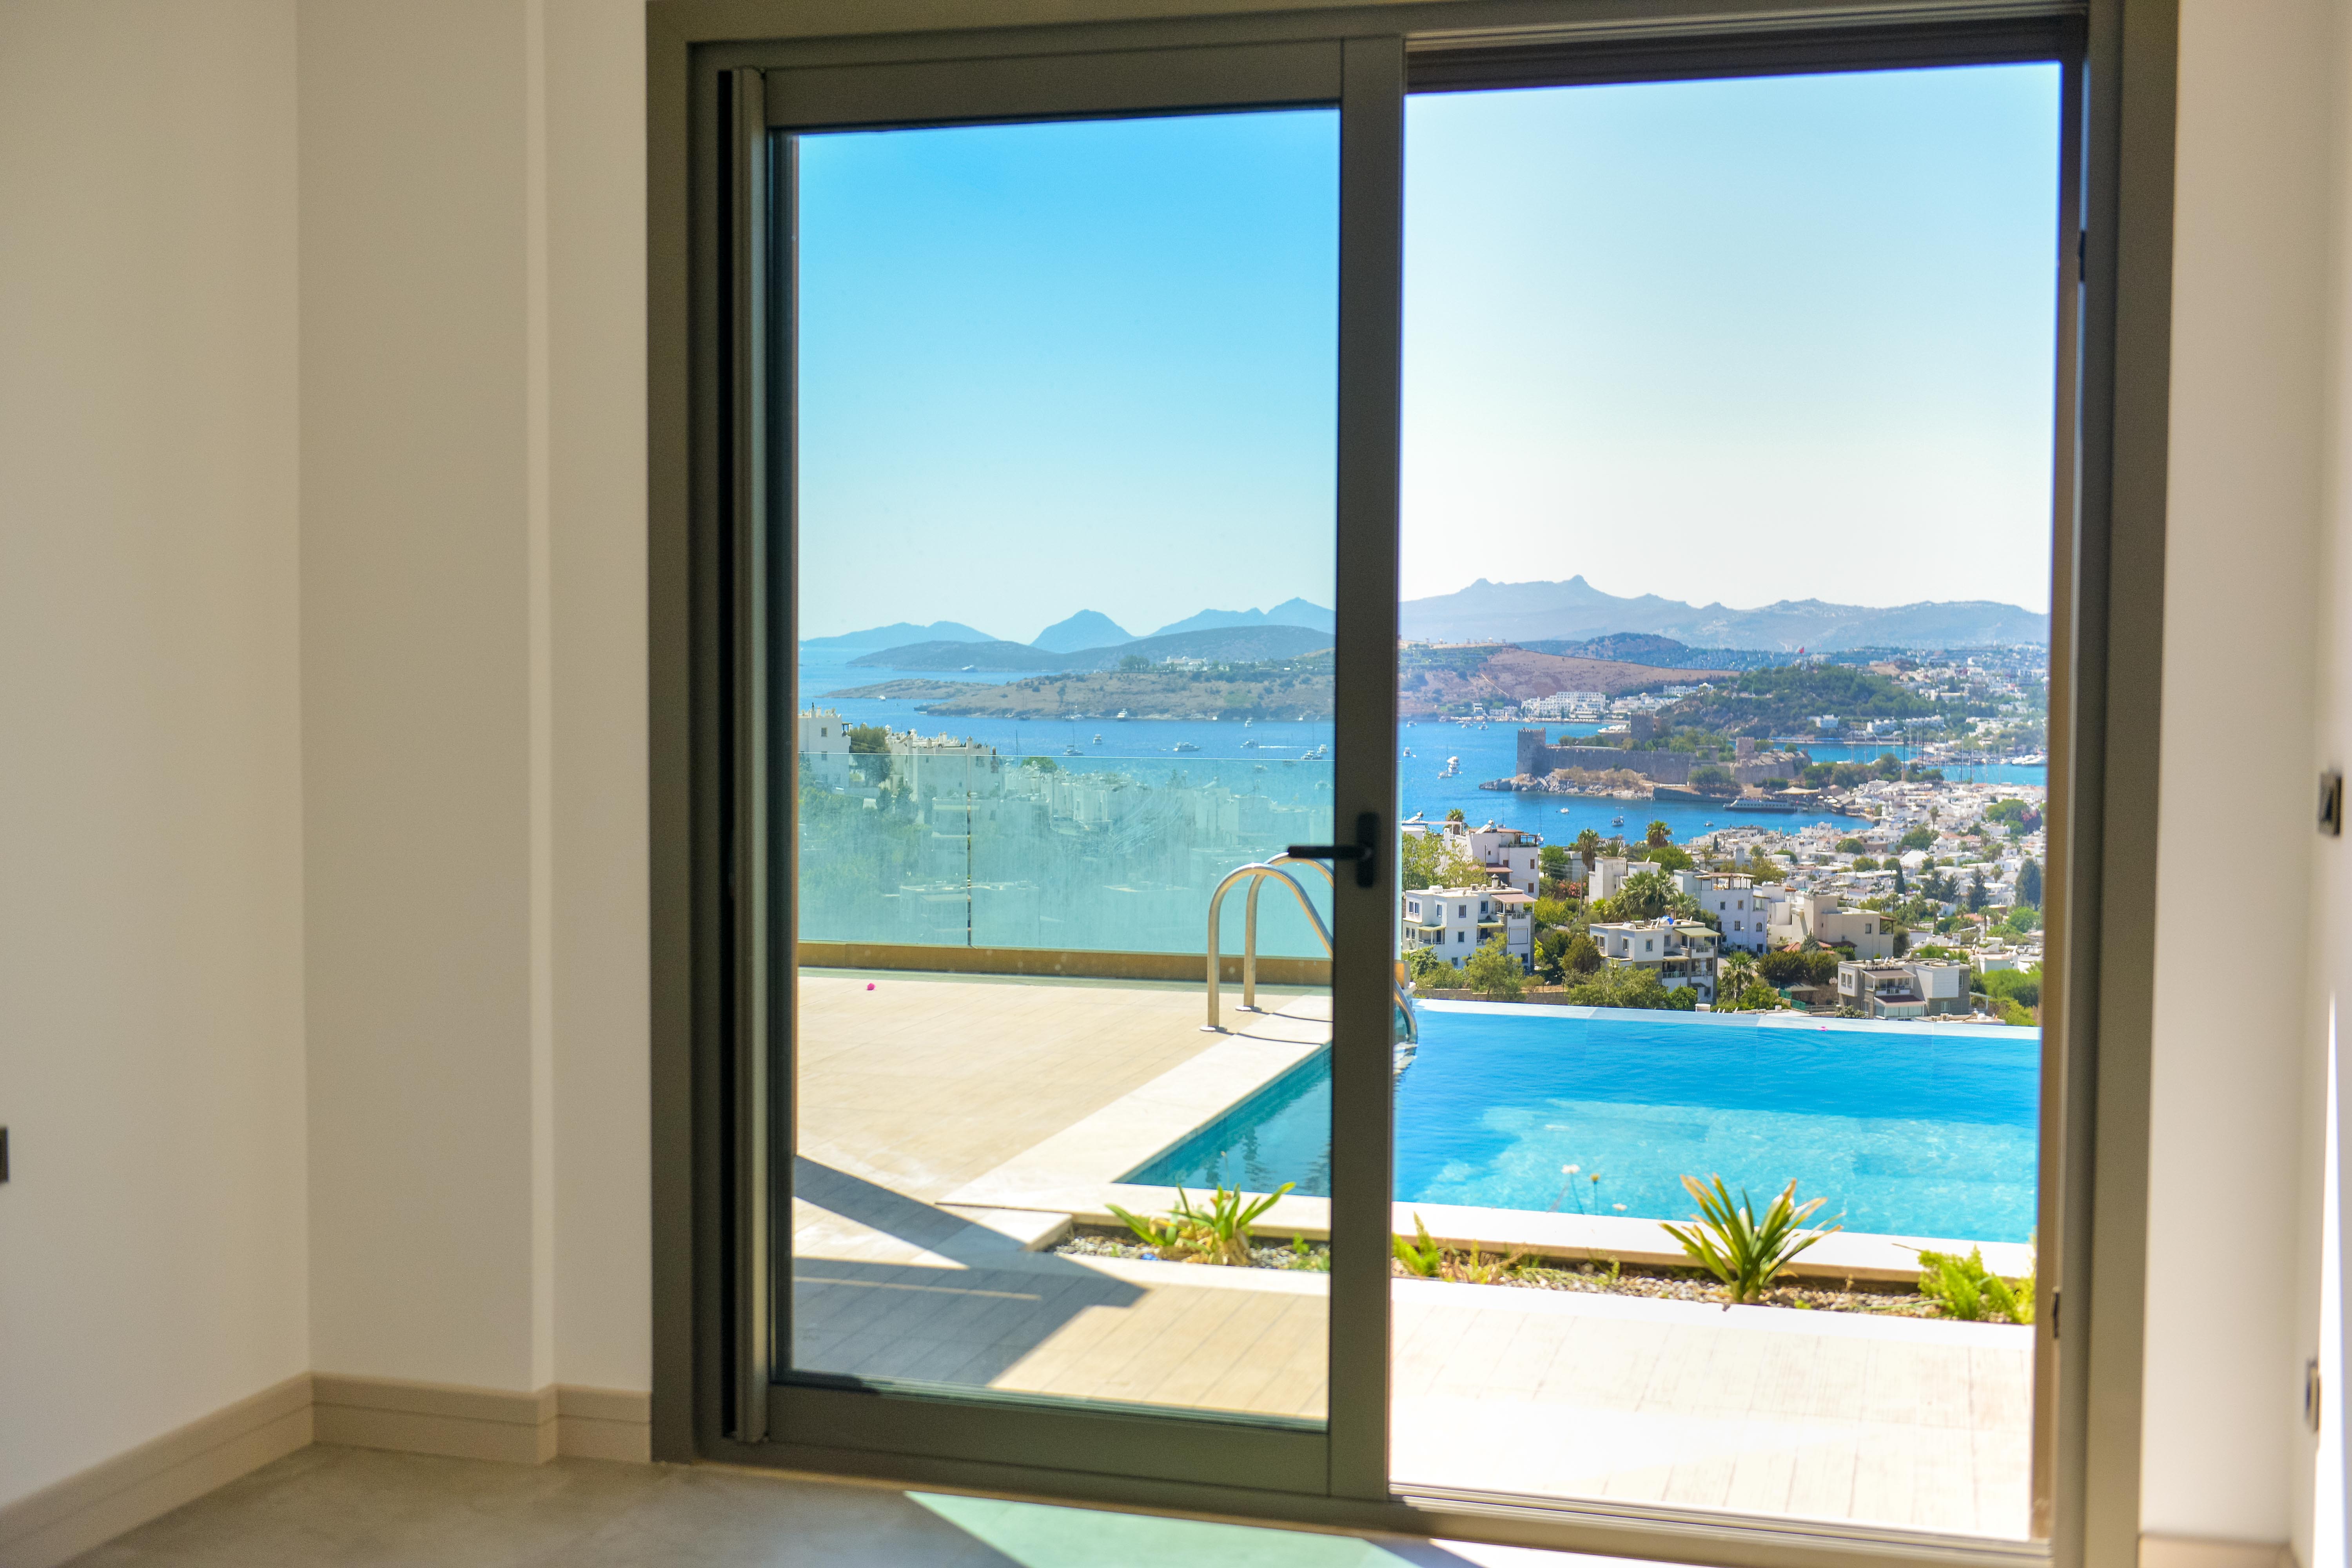 Villa in the center of Bodrum with views of the fortress and the sea